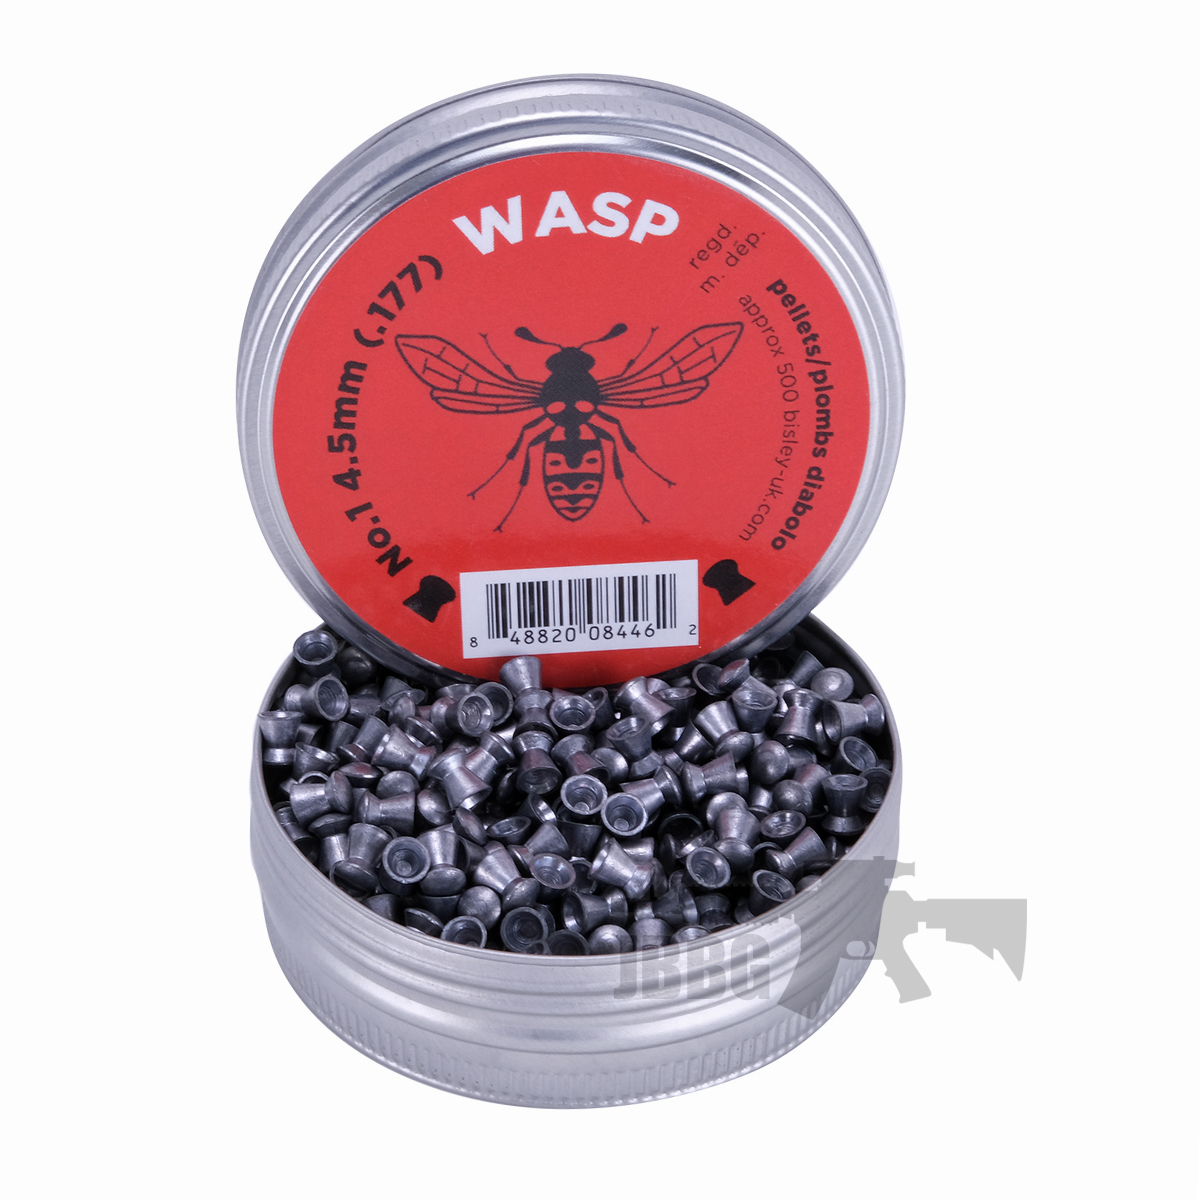 Bisley Wasp Red .177 ~Tin of 500 pellets for Air Gun Rifle Pistol 4.5mm 